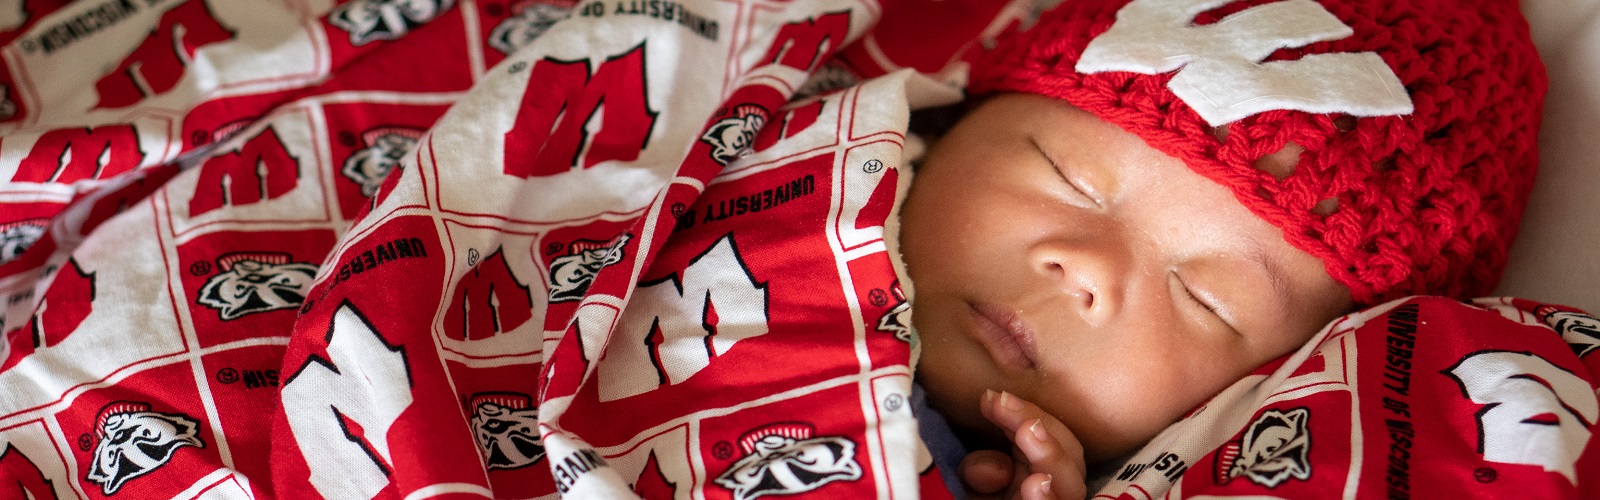 young baby wrapped in Wisconsin Badger blanket and hat